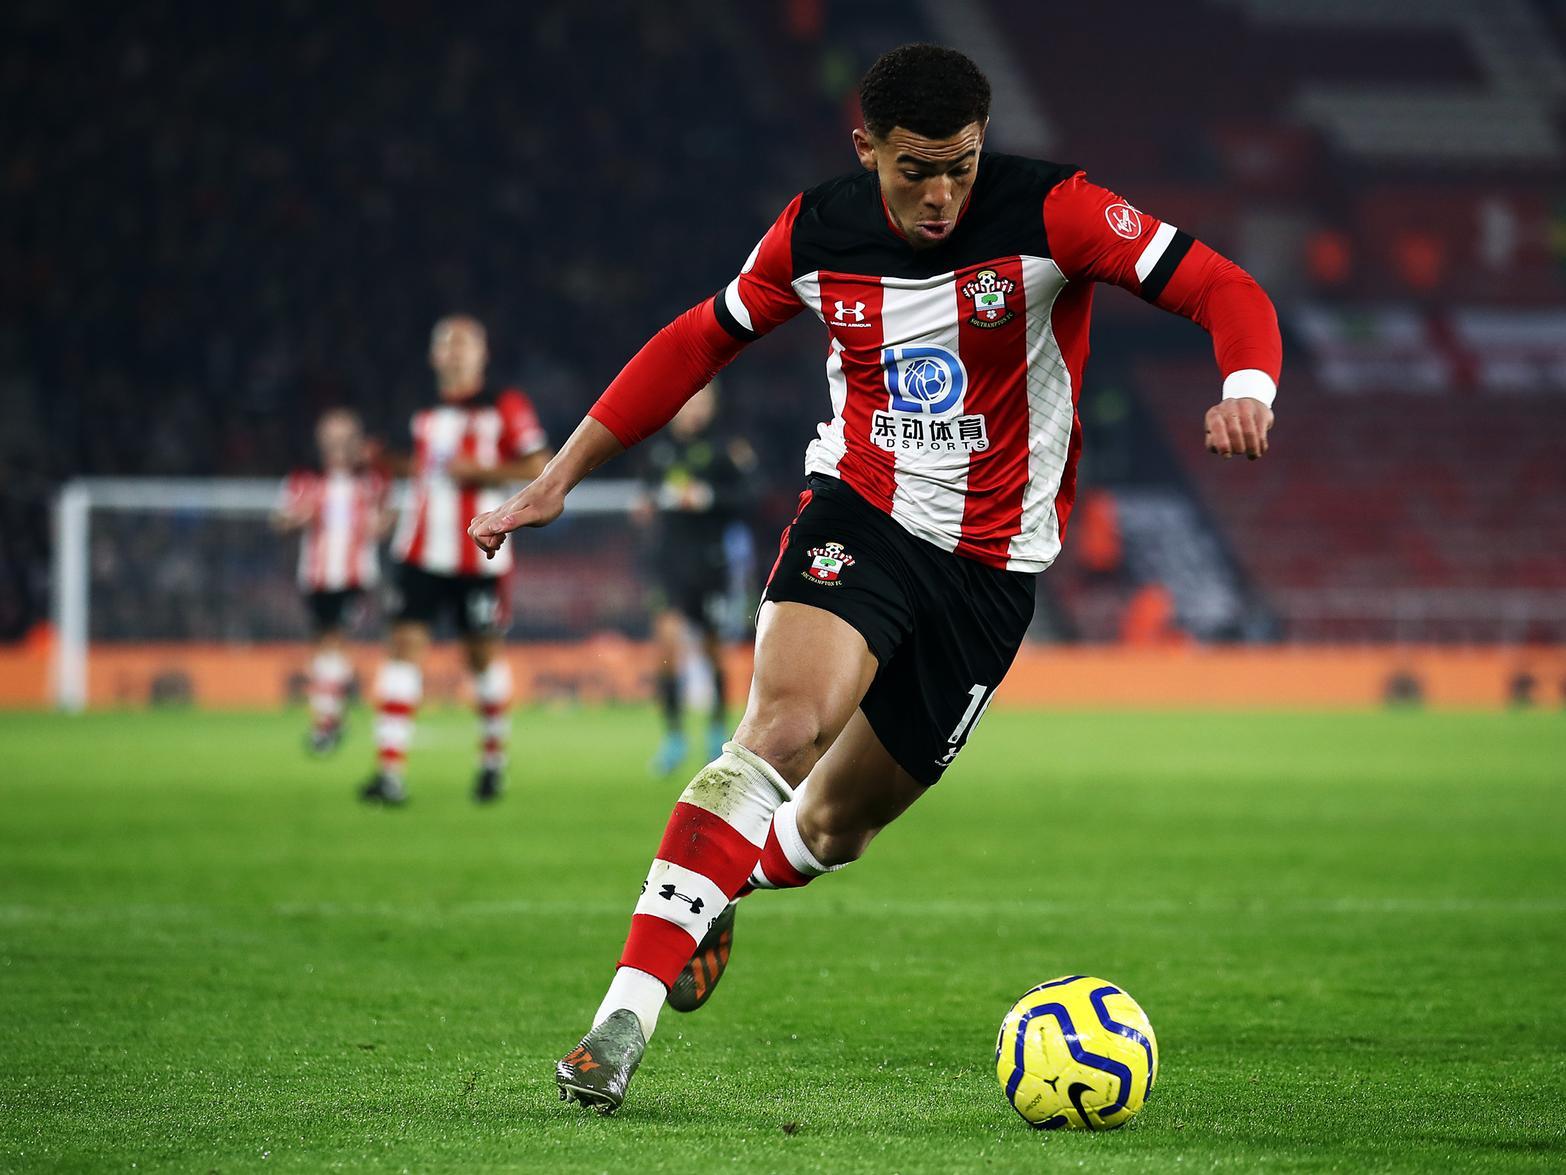 Leeds United are understood to be focusing their attention on luring either Sheffield United's Billy Sharp or Southampton's Che Adams to the club, the latter appearing to be their key target. (Yorkshire Evening Post)